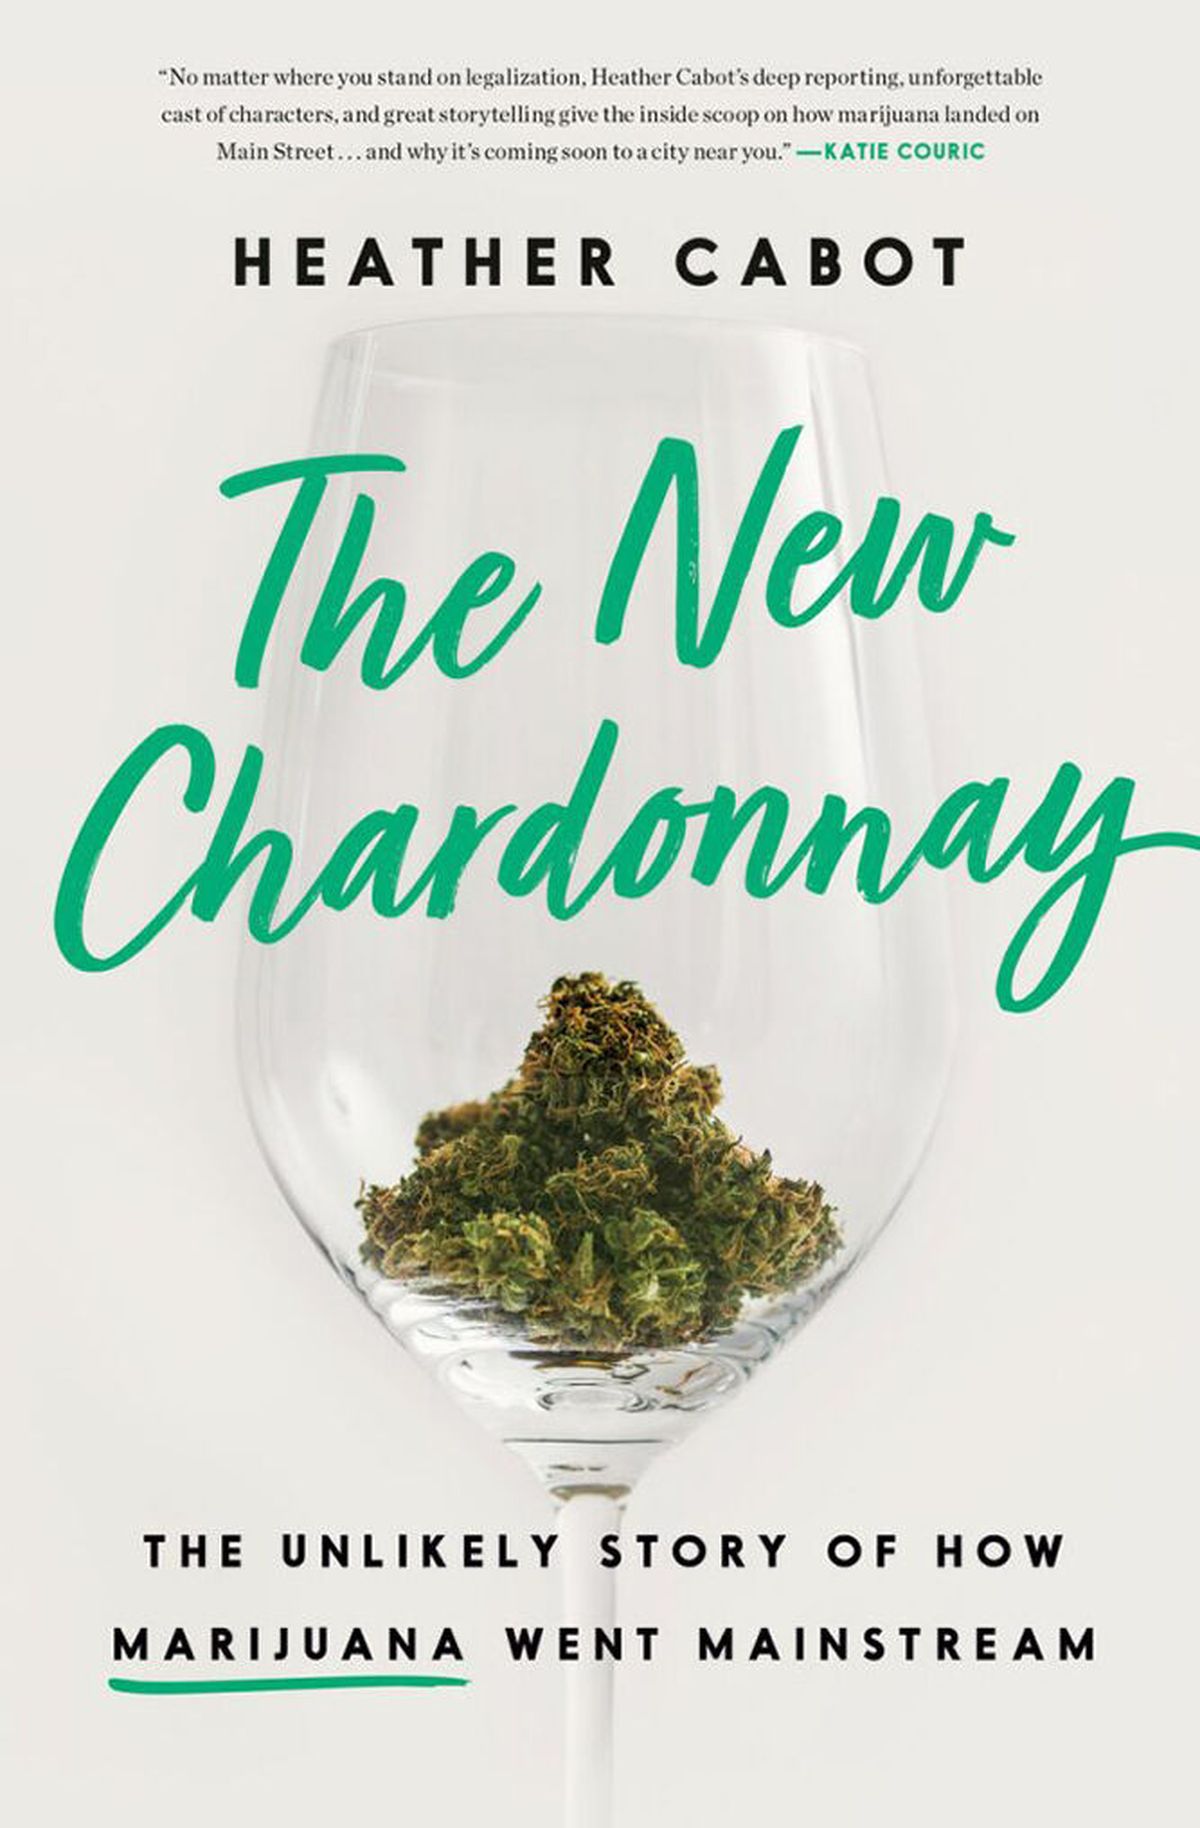 “The New Chardonnay” by Heather Cabot (Courtesy)